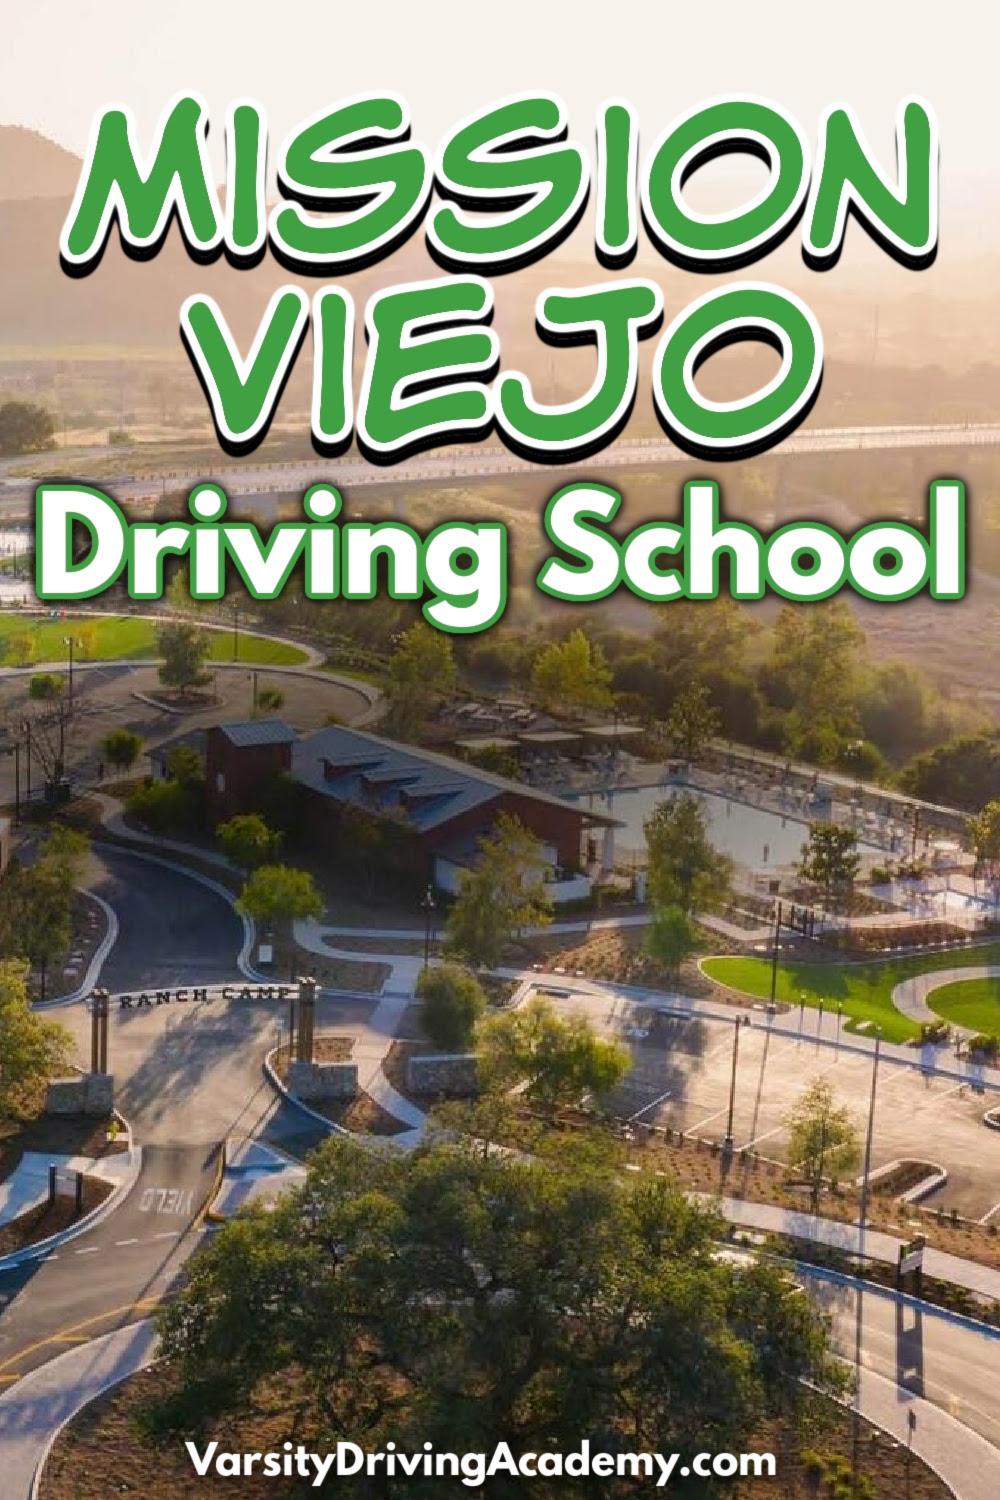 Welcome to Varsity Driving Academy, your #1 rated Mission Viejo Driving School.